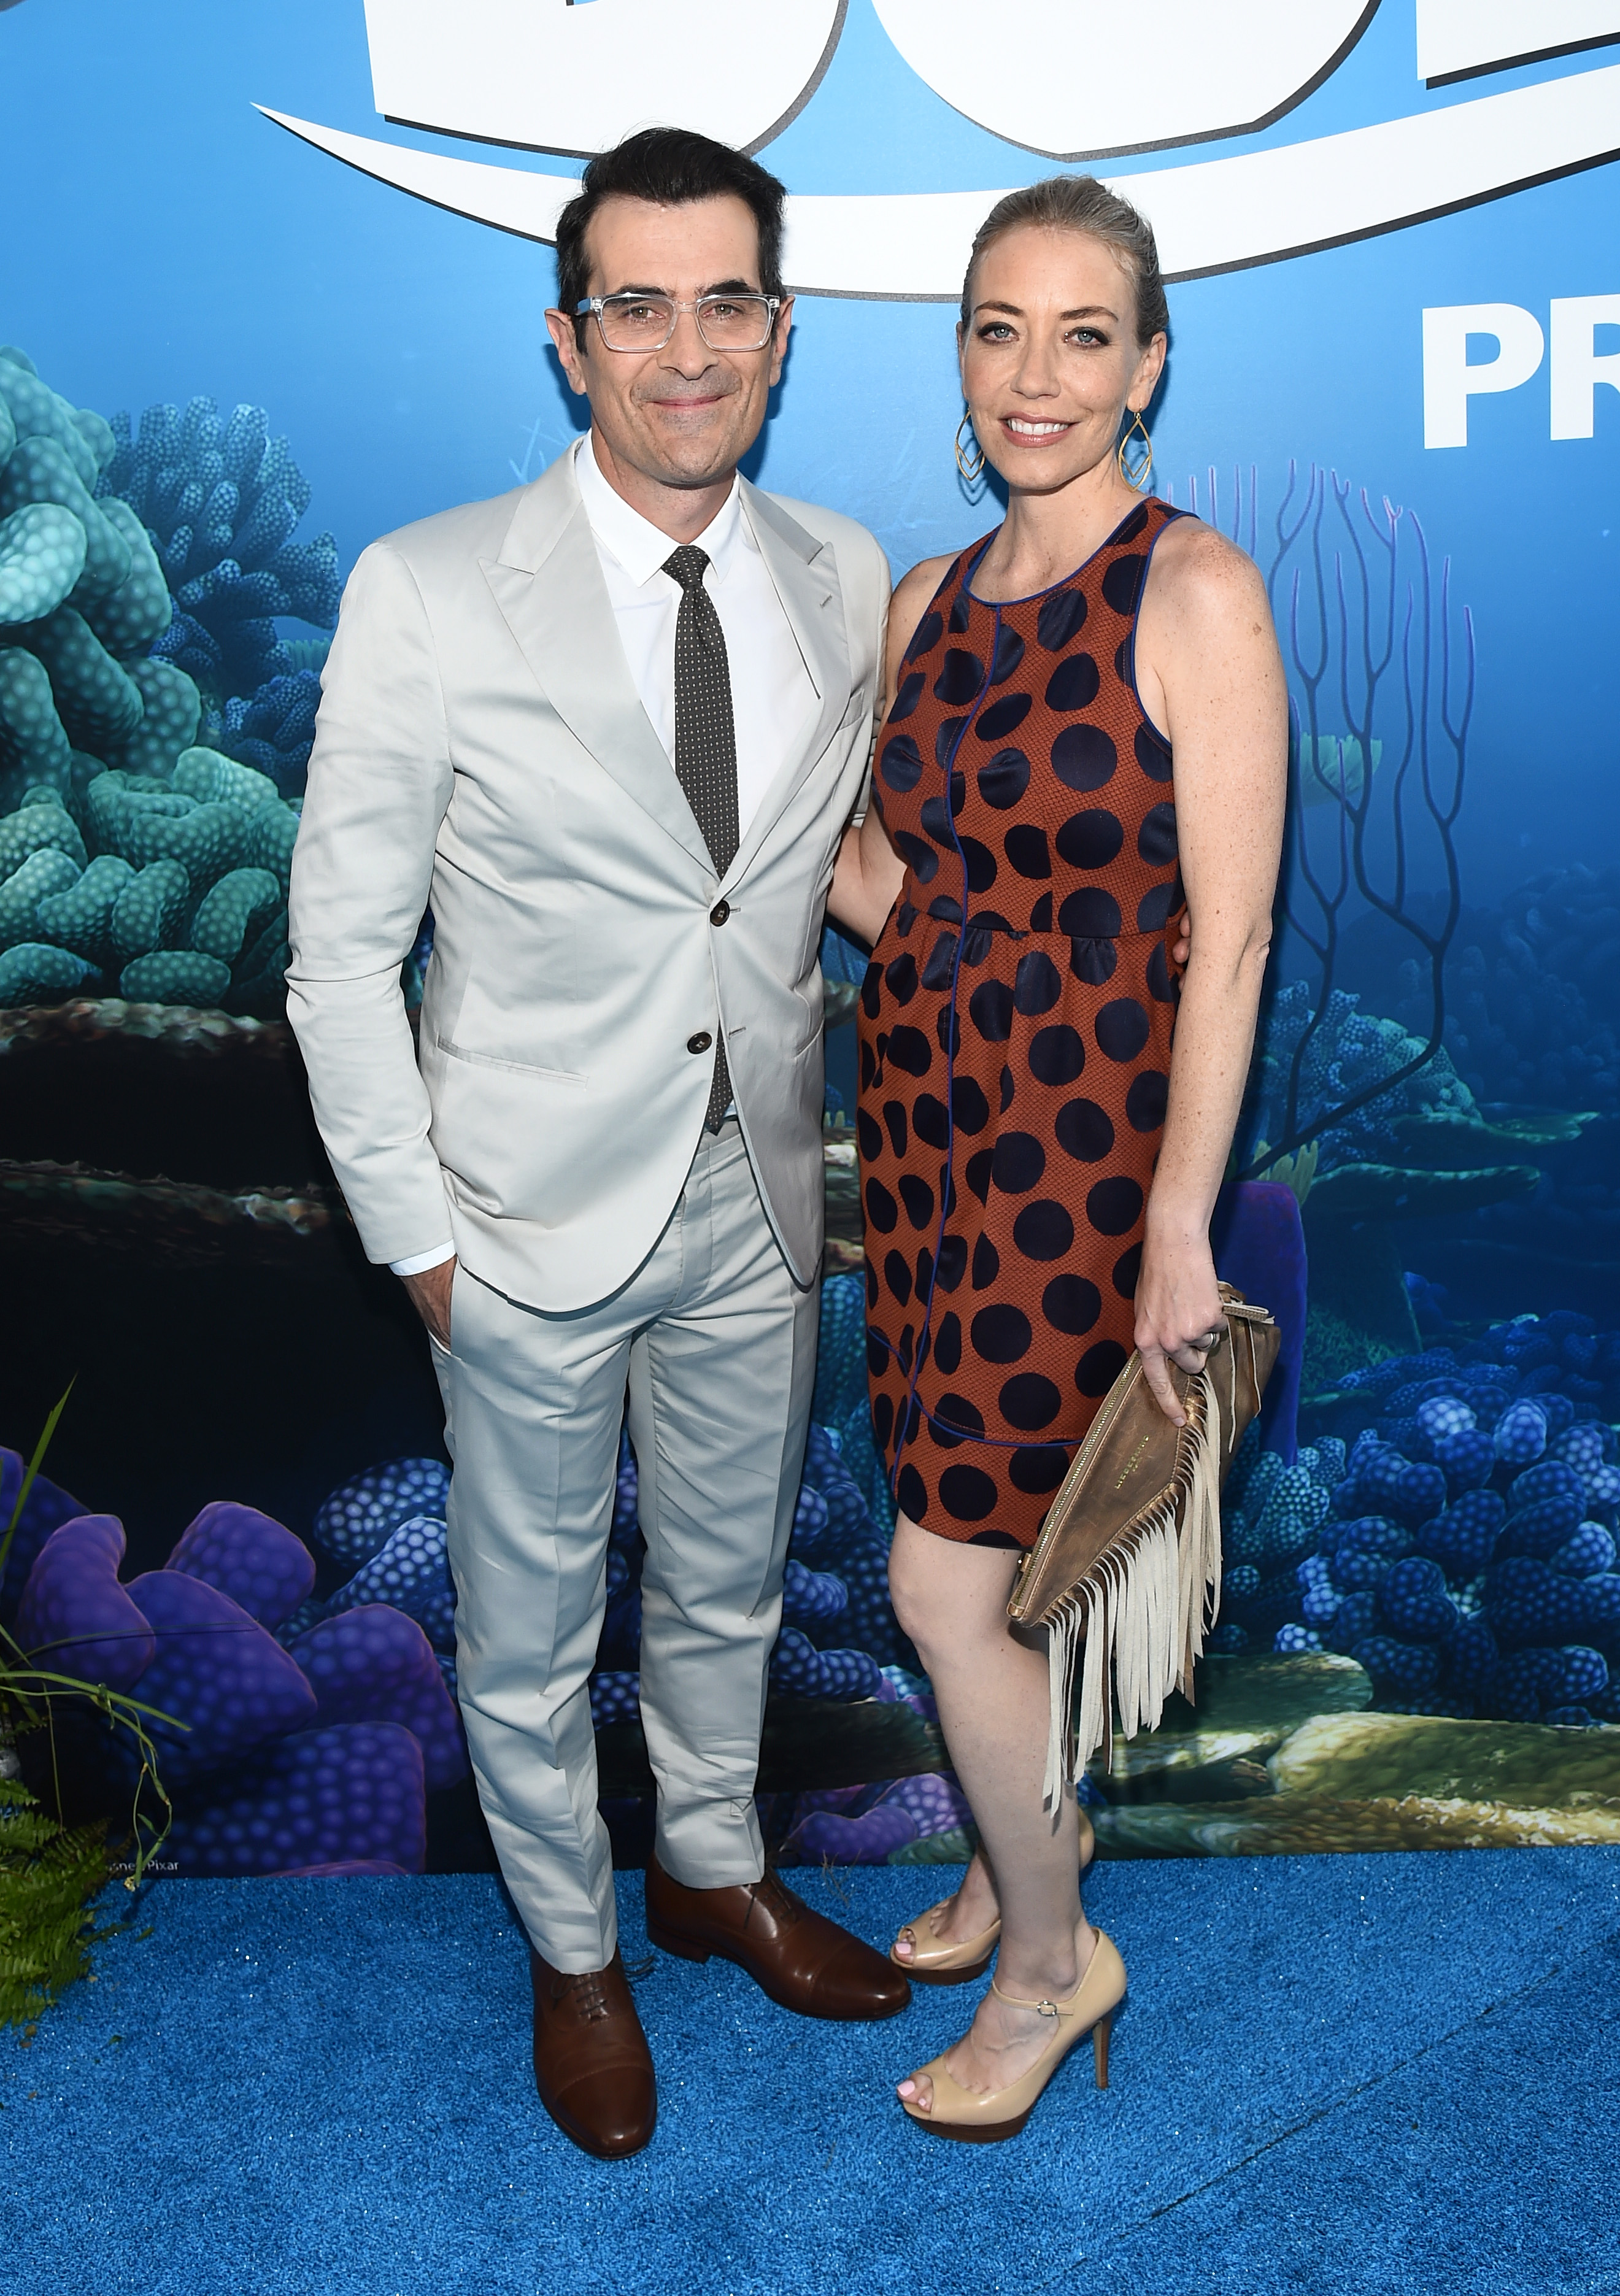 Ty and Holly Burrell at the "Finding Dory" film premiere in Los Angeles on June 8, 2016 | Source: Getty Images